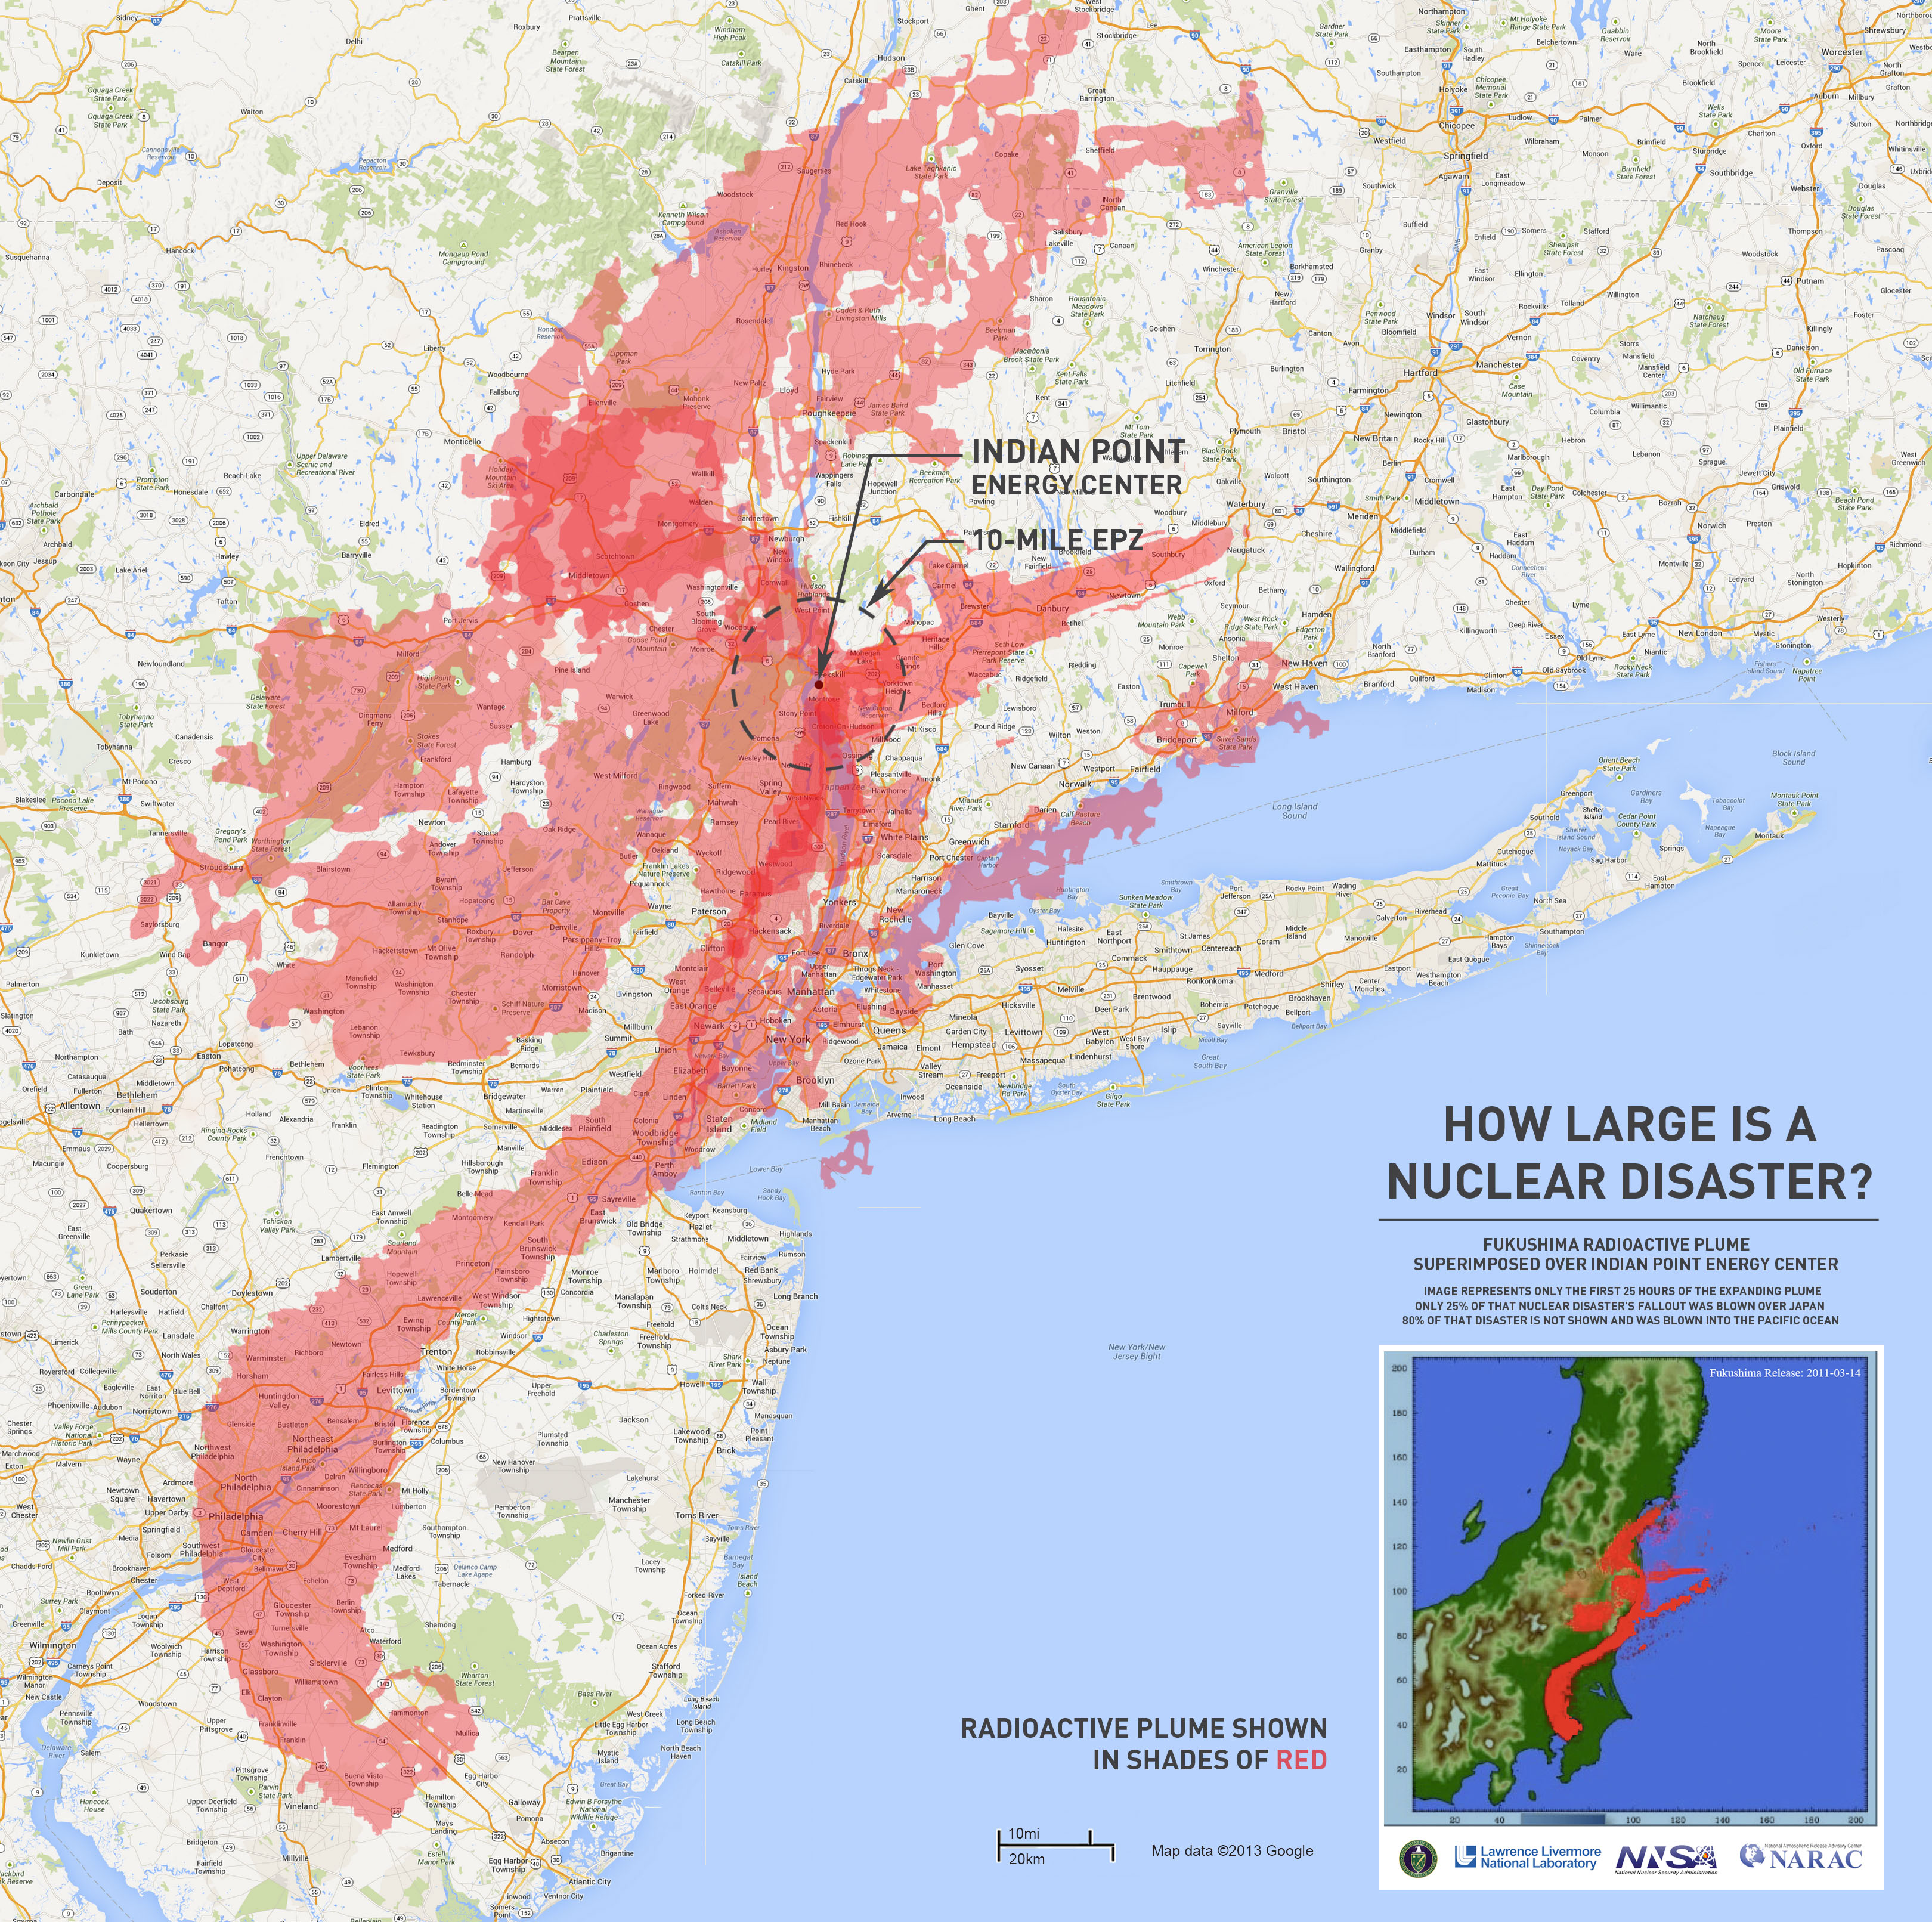 Fukushima radiation plume overlaid on map centered at Indian Point reactors. Can anyone (other than NRC) seriously believe this area can be successfully evacuated in a nuclear accident? From Samuel Lawrence Foundation website.